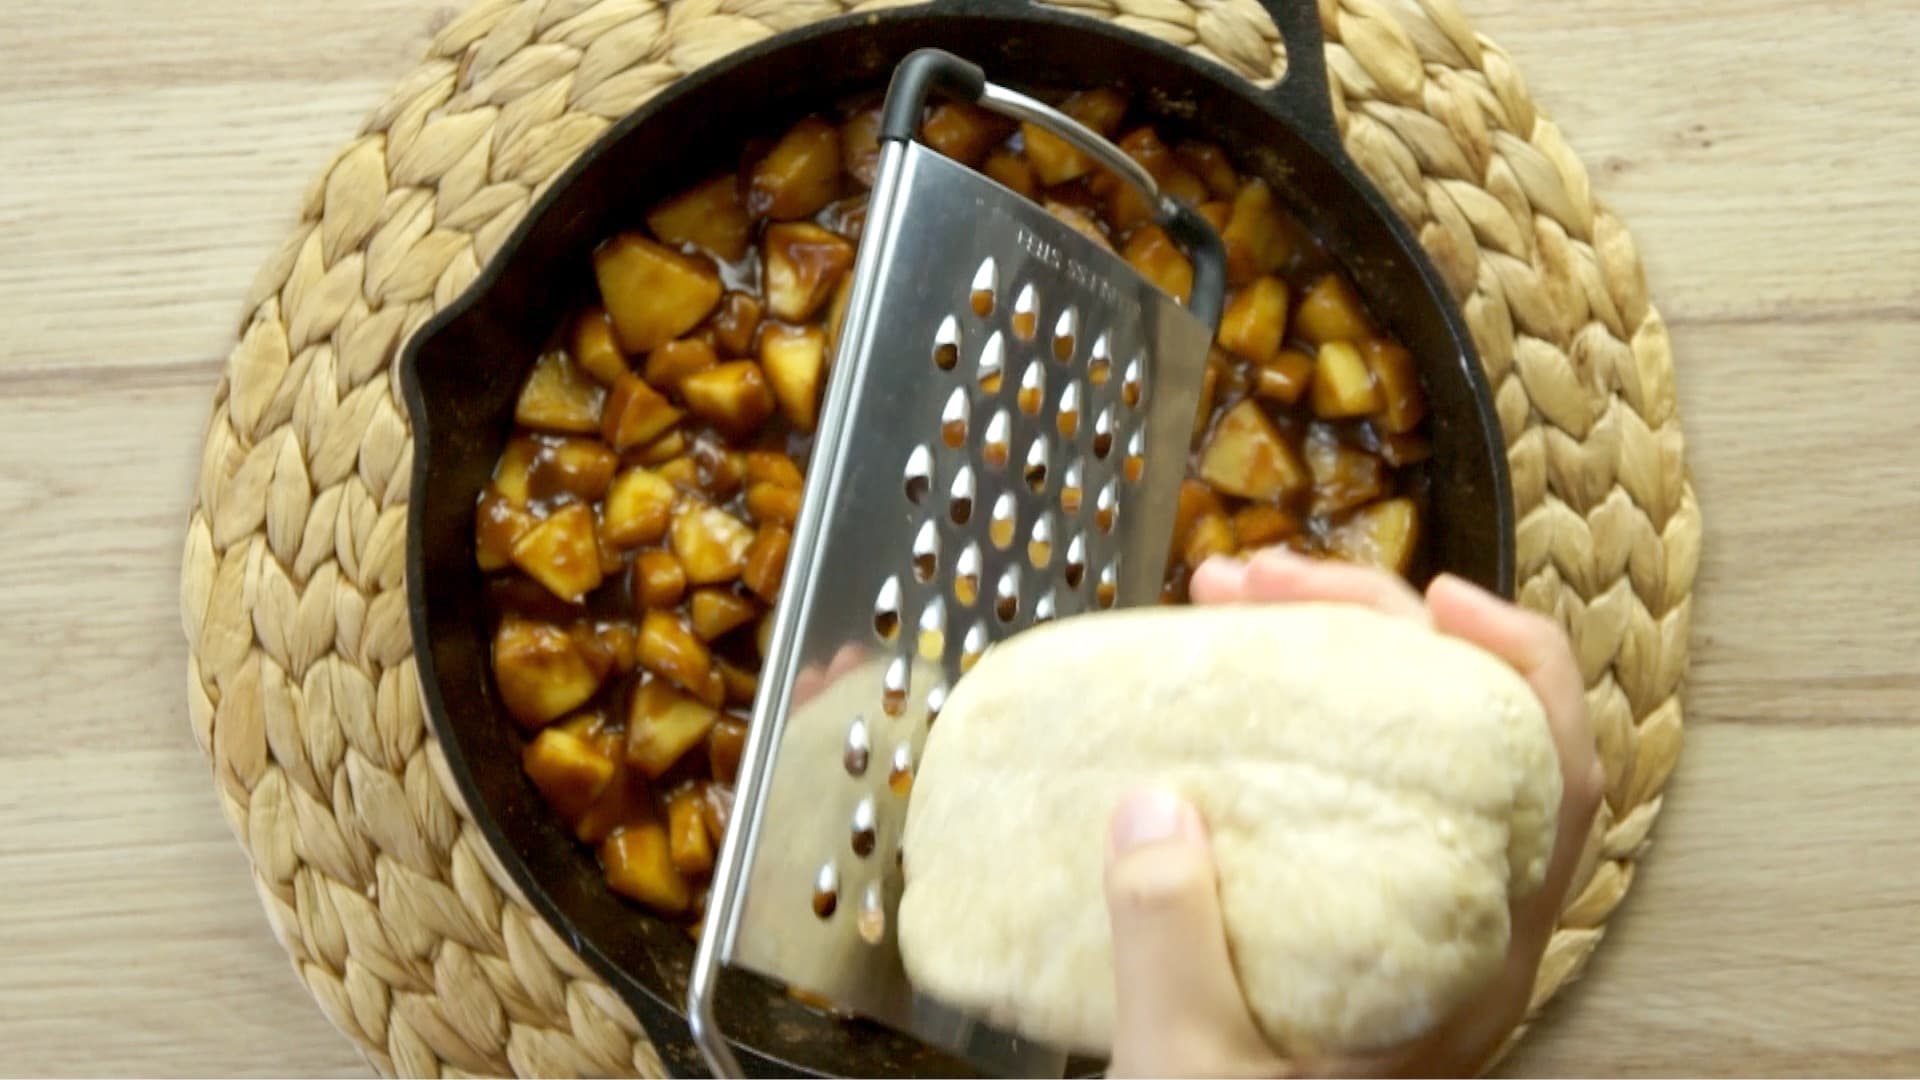 A hand is holding a large hole cheese grater and a frozen dough and about to grate it on top of a black cast iron skillet full of caramel apple slices.